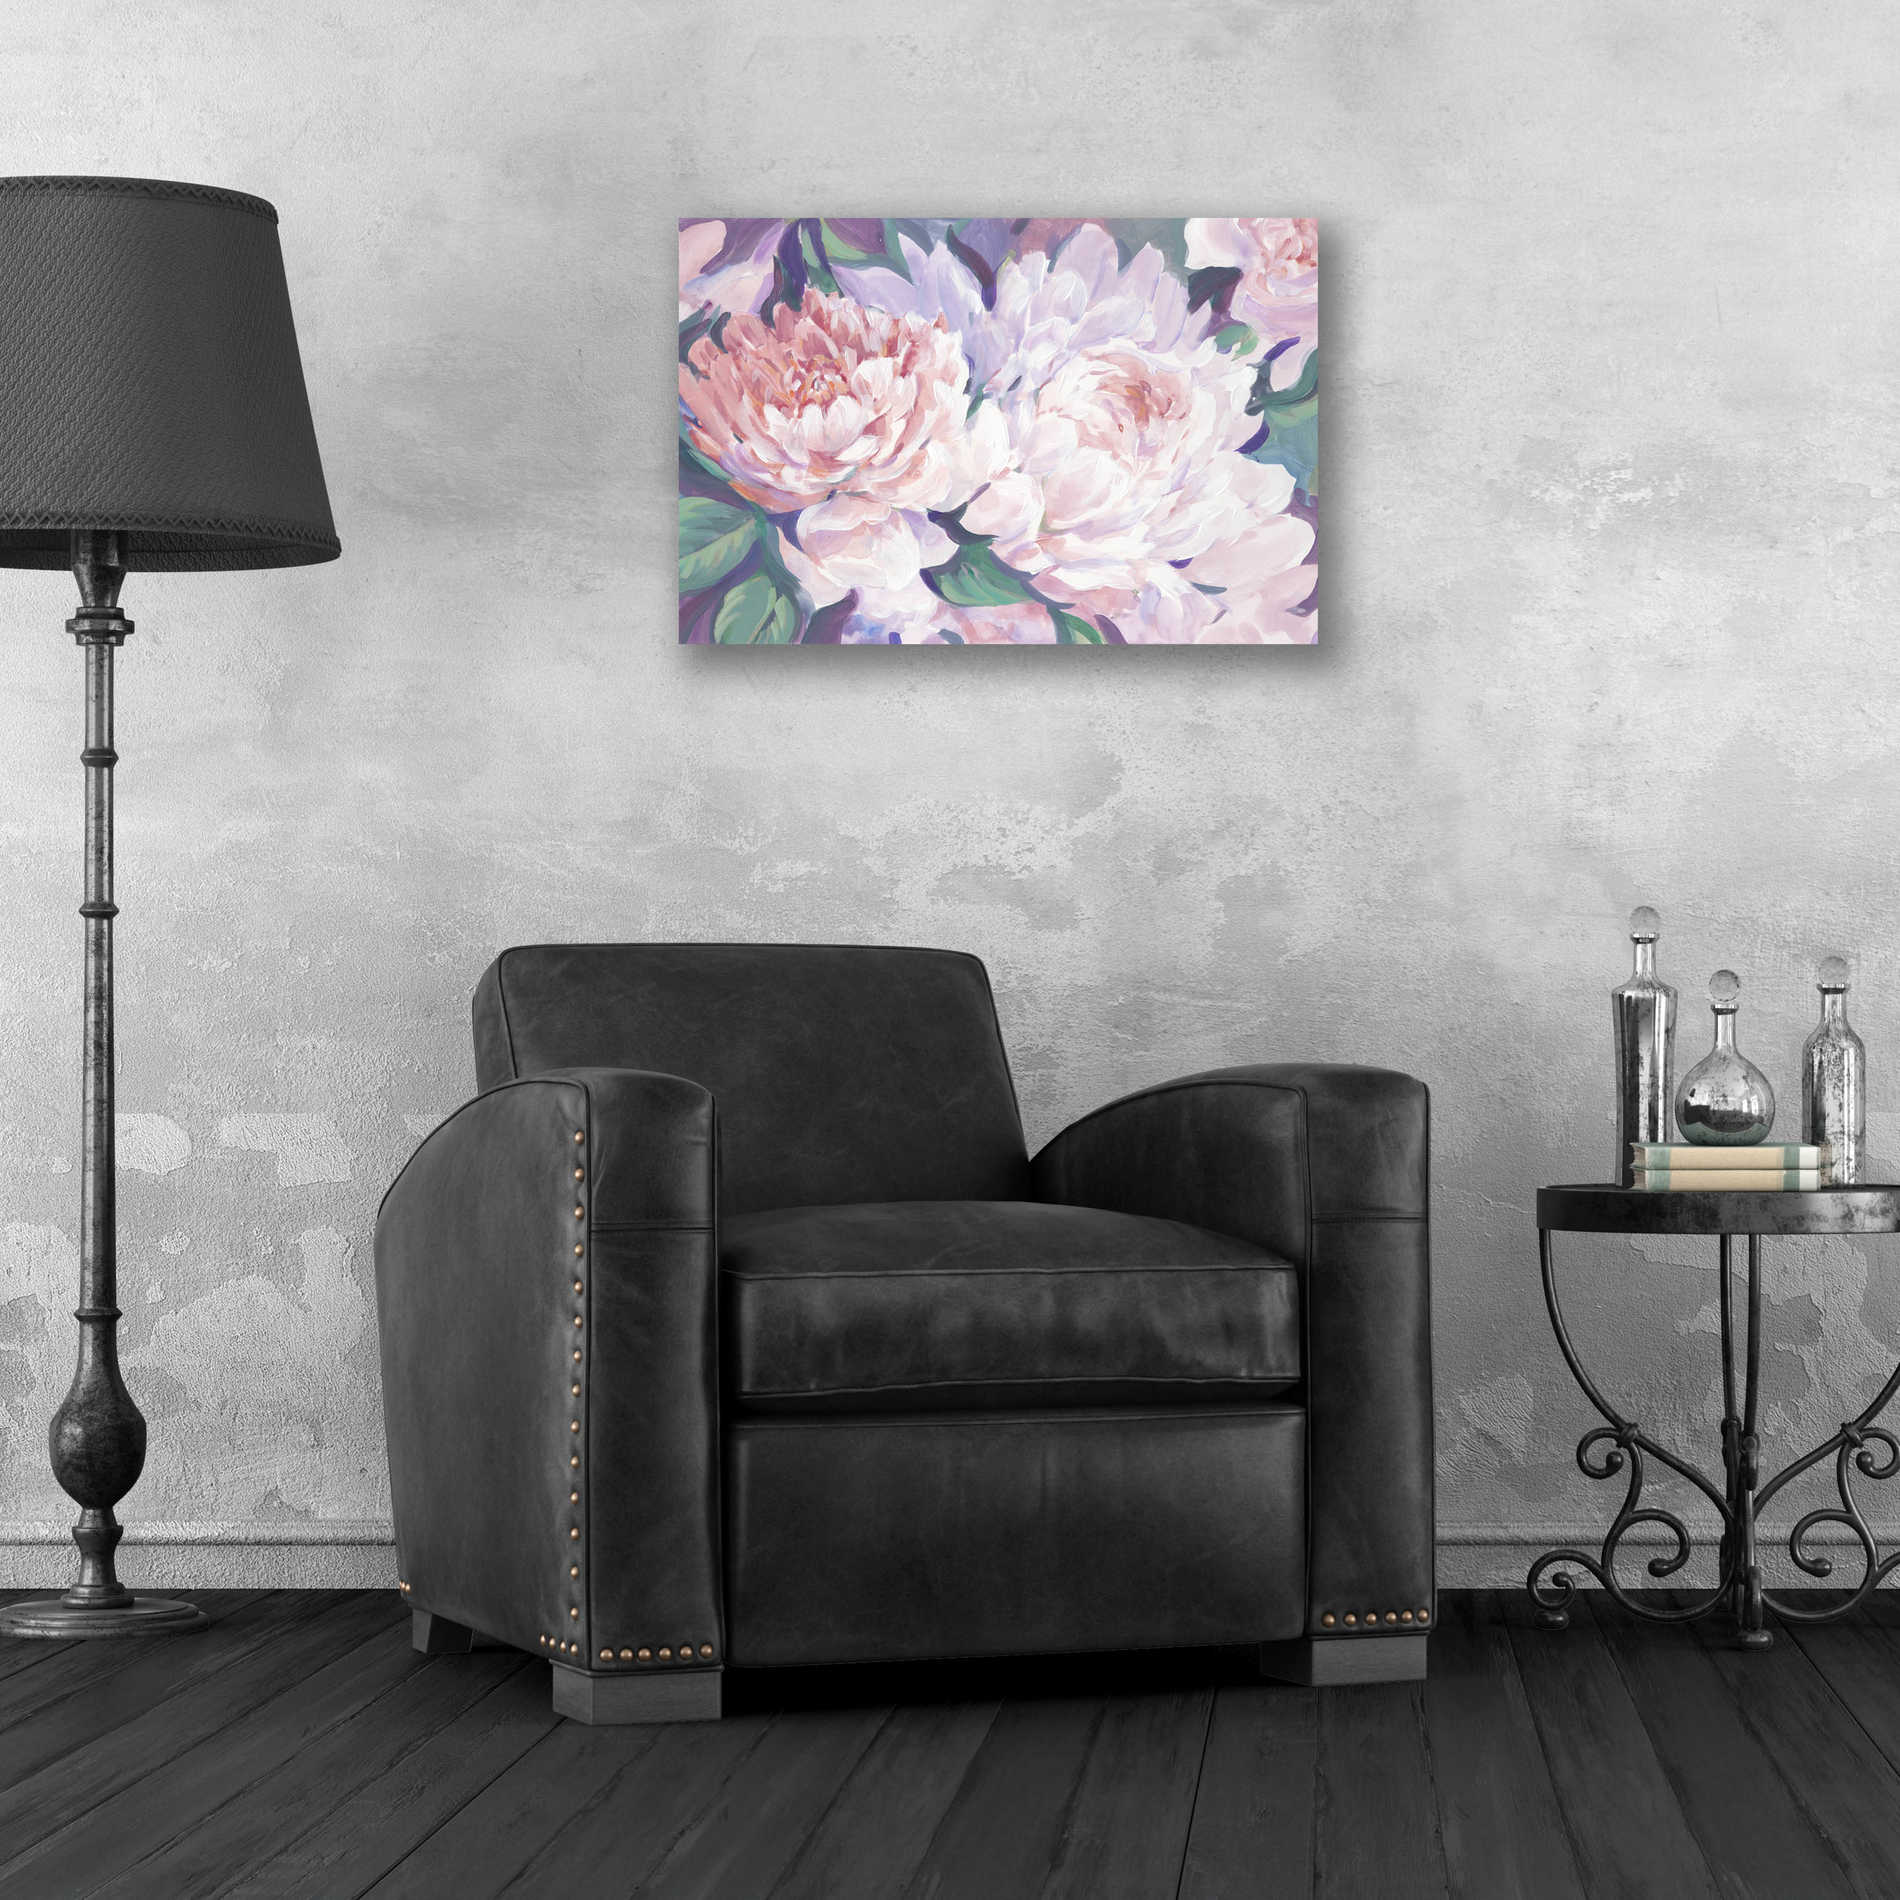 Epic Art 'Peonies in Bloom I' by Tim O'Toole, Acrylic Glass Wall Art,24x16